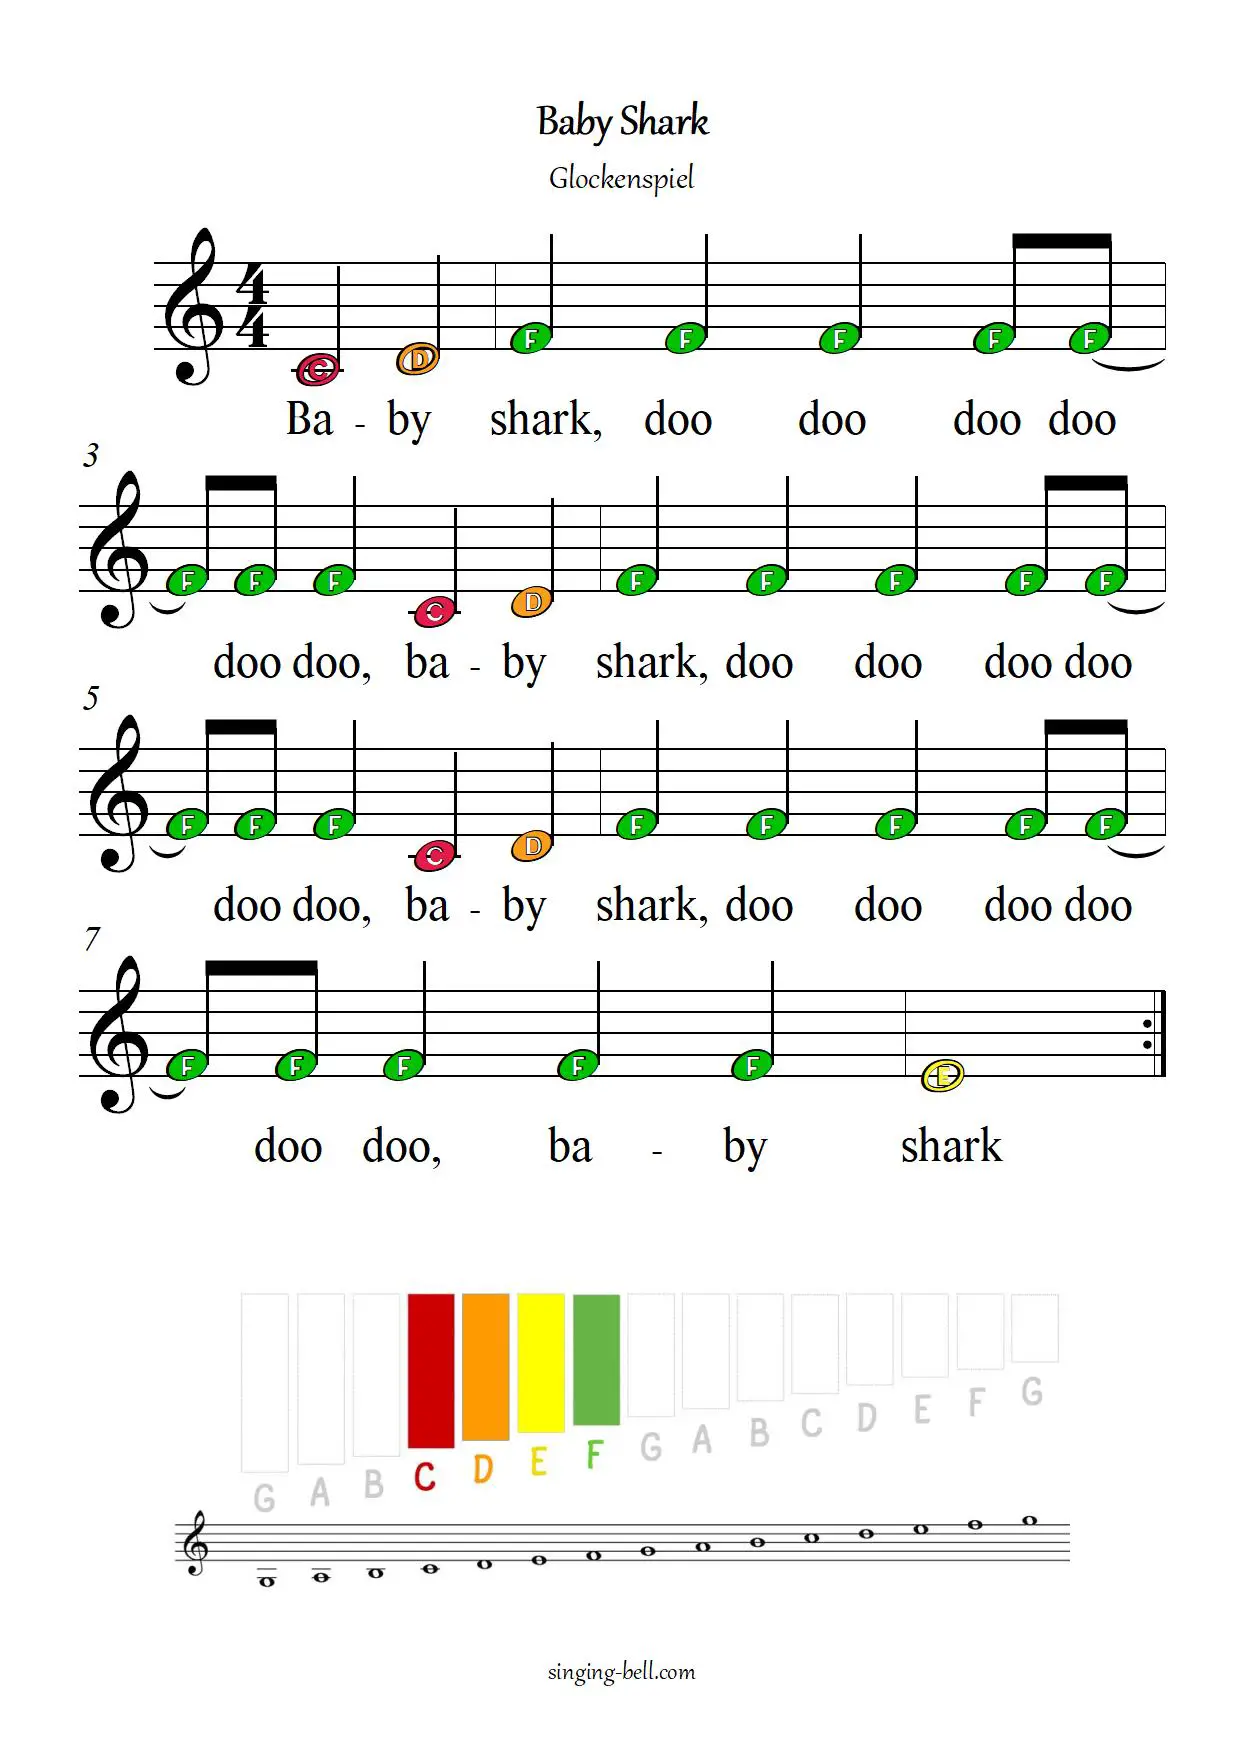 Baby Shark free xylophone glockenspiel sheet music letters color notes chart pdf